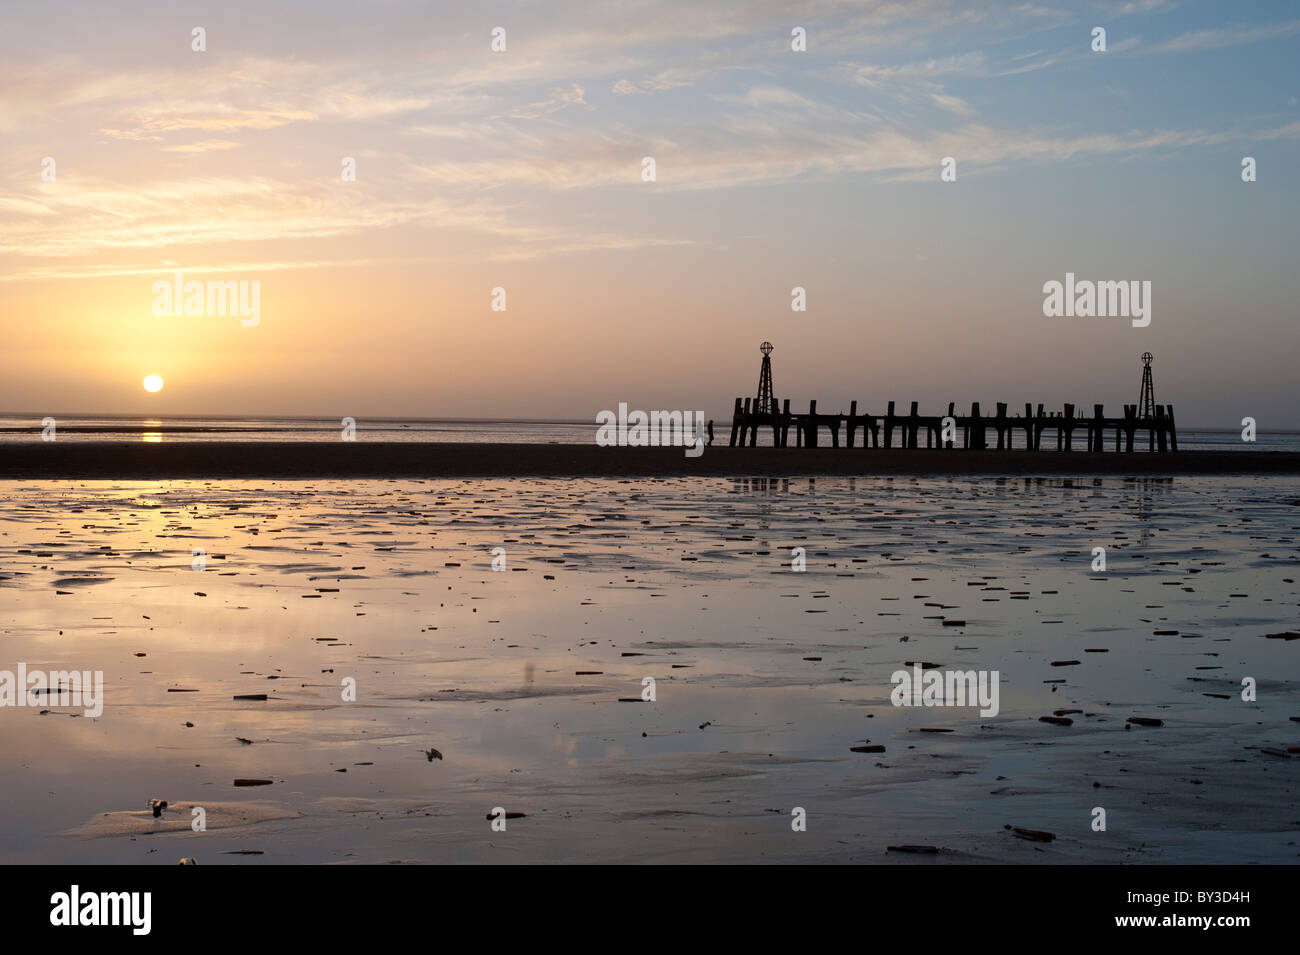 The sun setting across the Ribble Estuary viewed from Lytham St Annes on the Fylde coast. Stock Photo